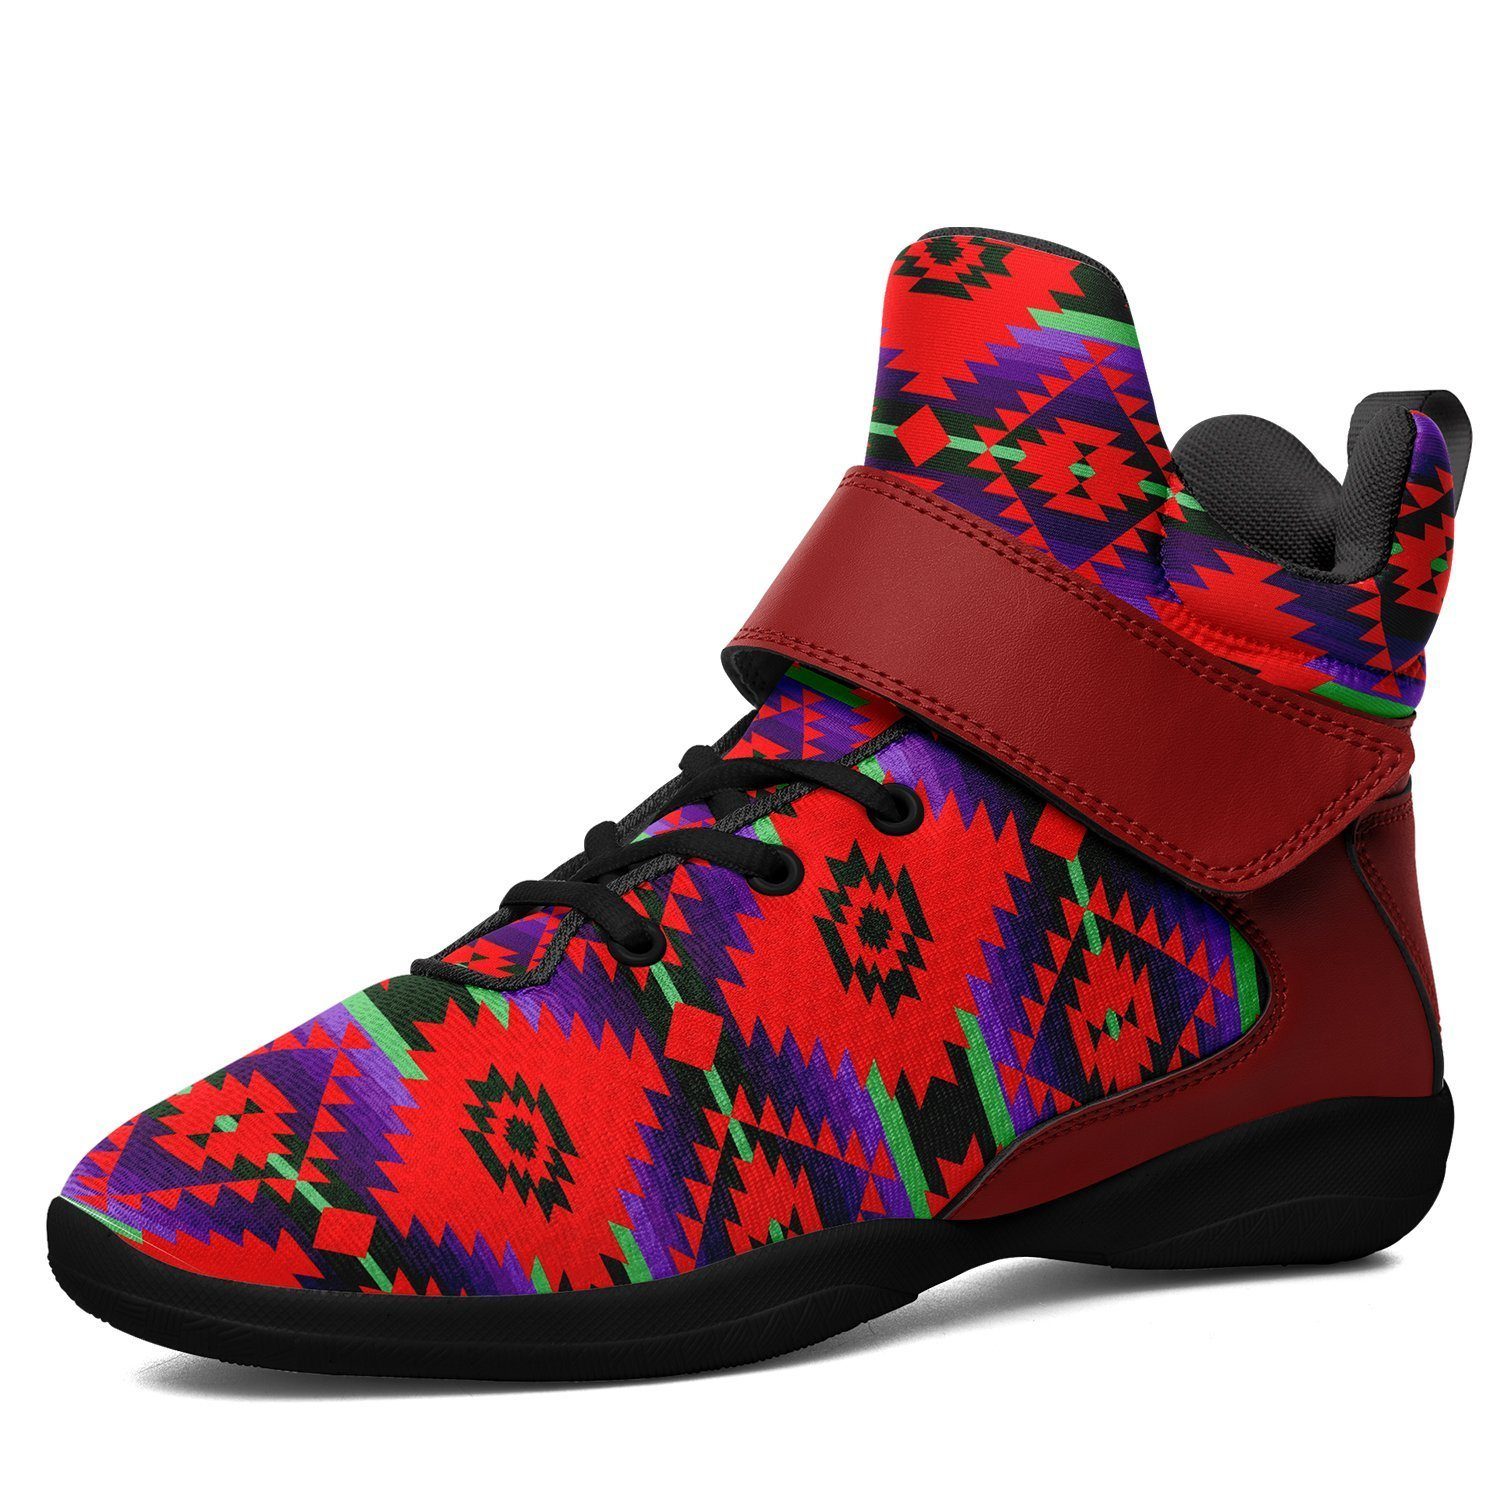 Cree Confederacy Chicken Dance Kid's Ipottaa Basketball / Sport High Top Shoes 49 Dzine US Child 12.5/ EUR 30 Black Sole with Red Strap 